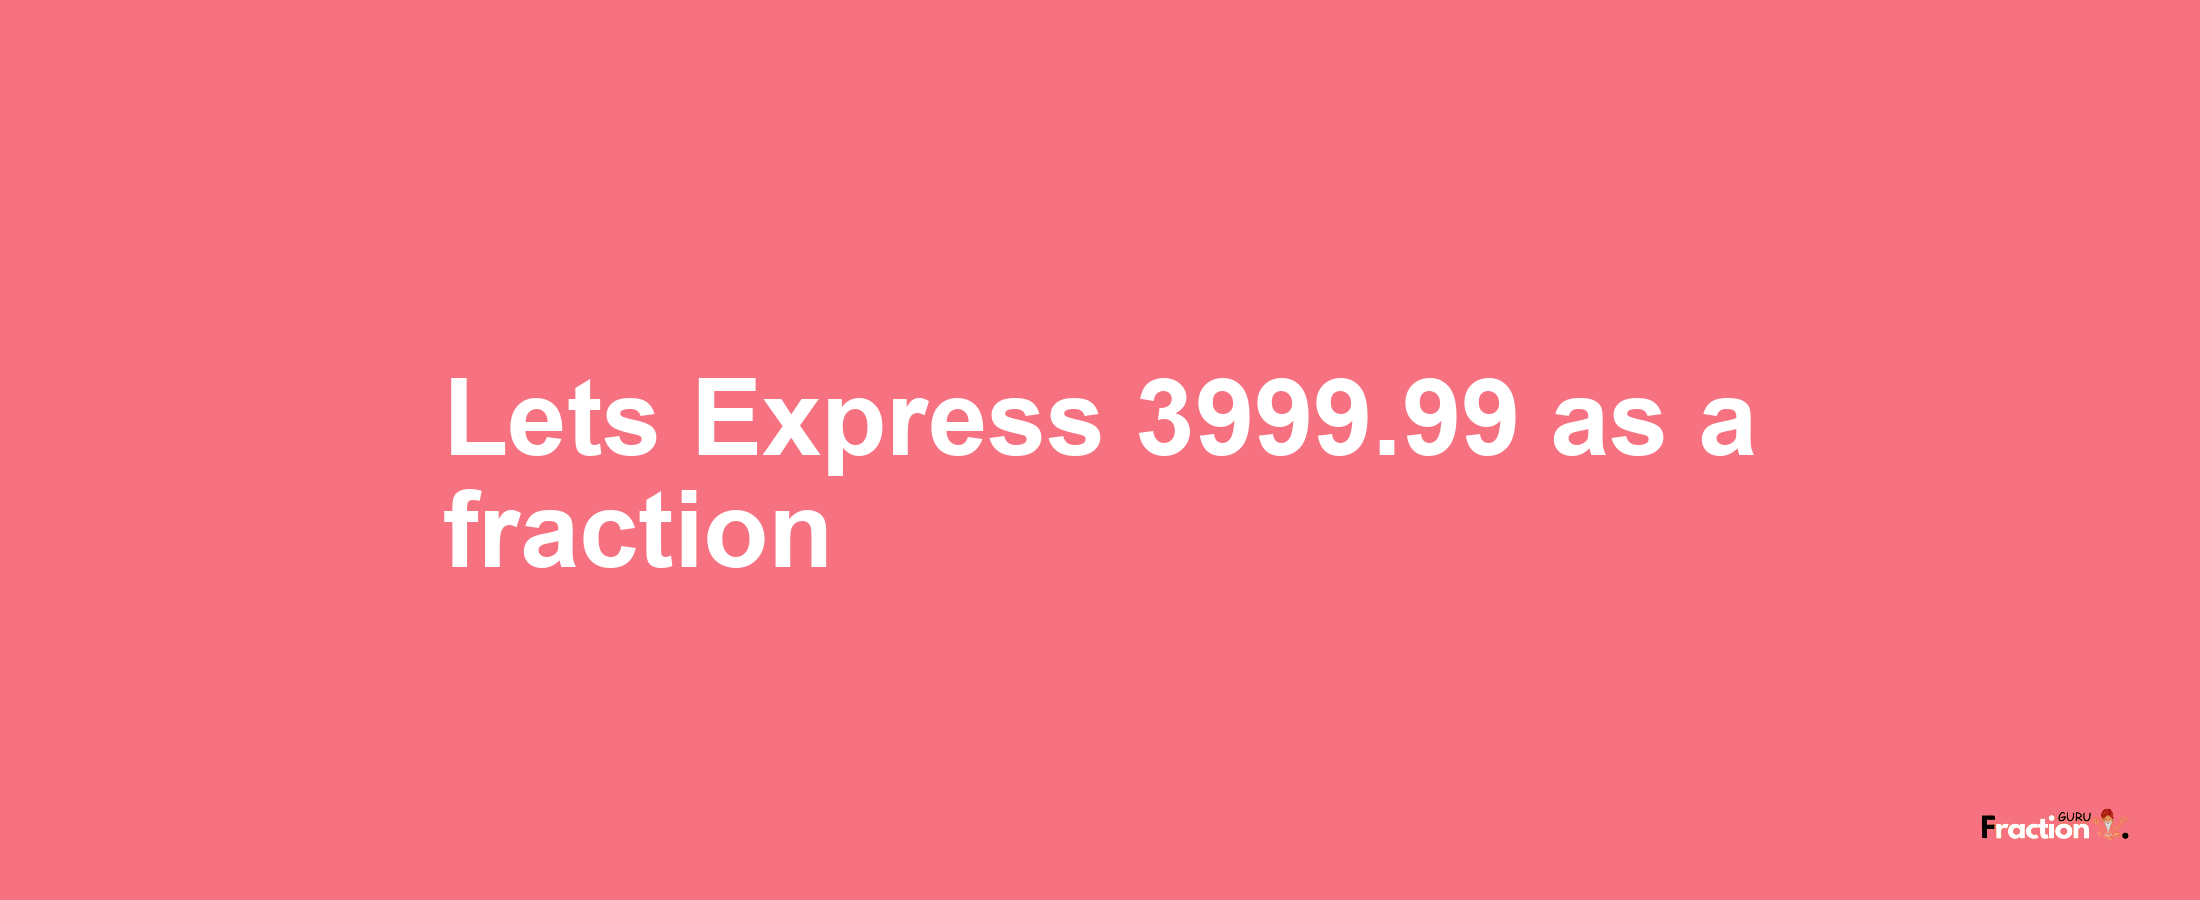 Lets Express 3999.99 as afraction